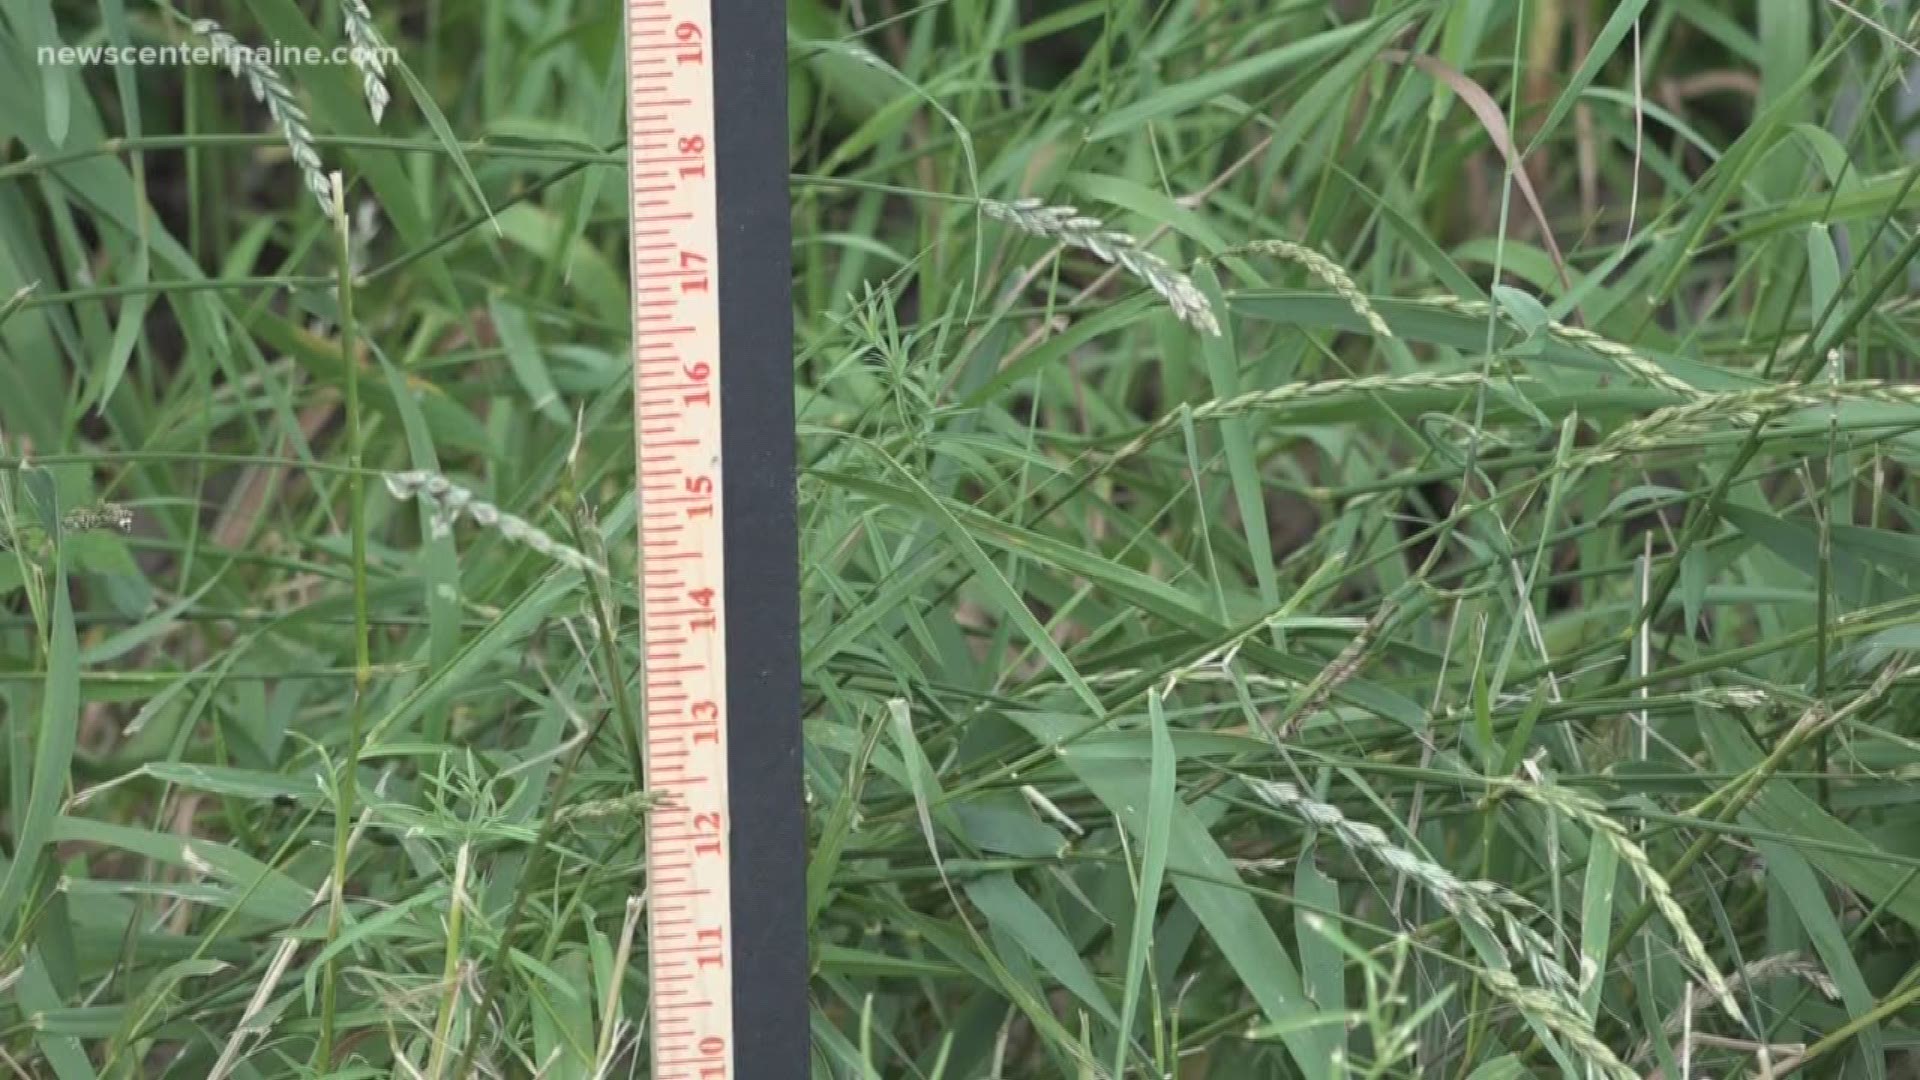 Residents in Millinocket are receiving letters from their code enforcement officer when their grass is too tall because they are in violation of their town's code.